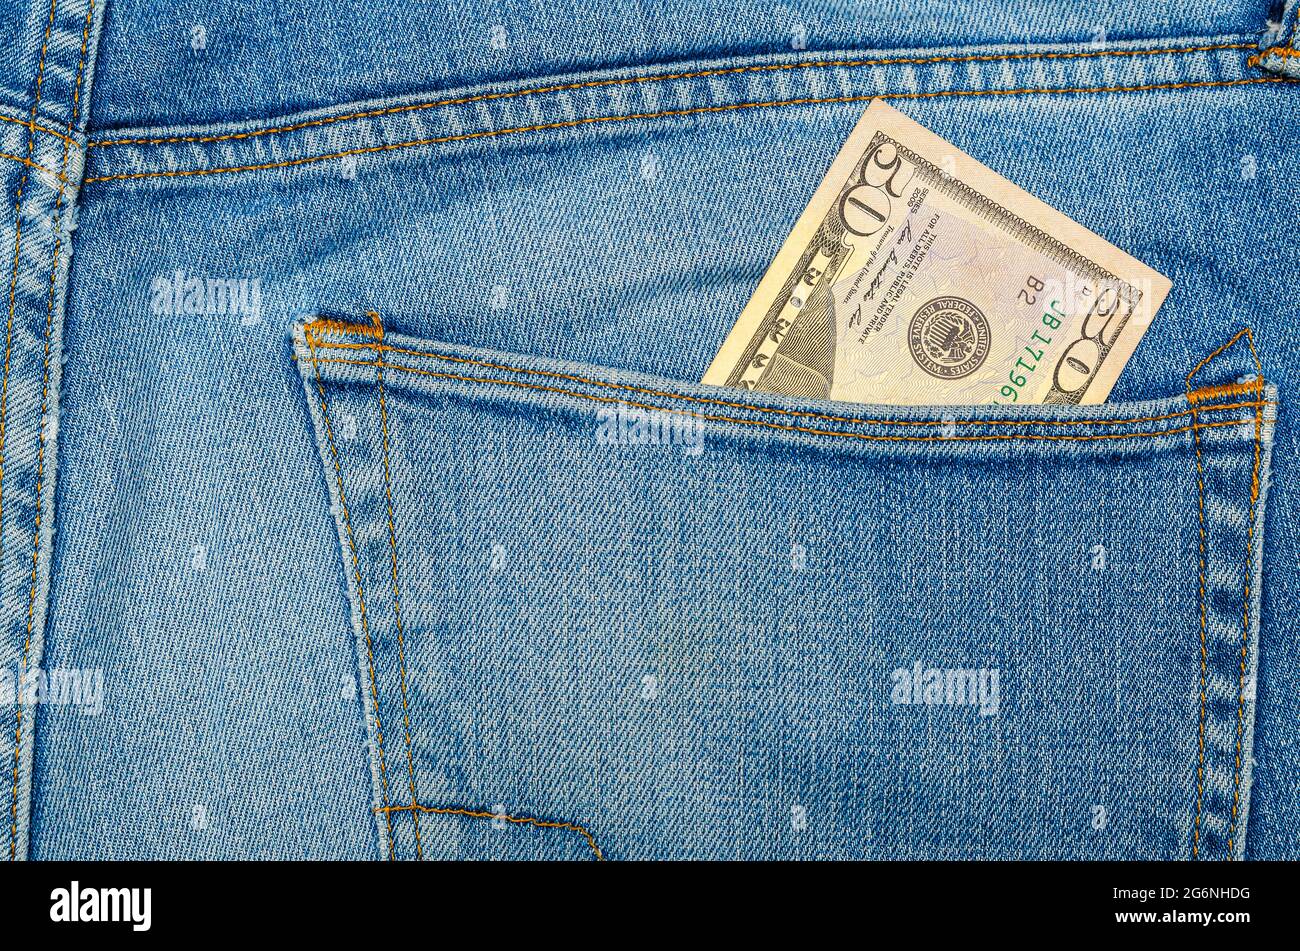 Money in my jeans pocket, 50 dollars in the back pocket of blue jeans.  Wealth and prosperity concept. Place for text. Copy space Stock Photo -  Alamy